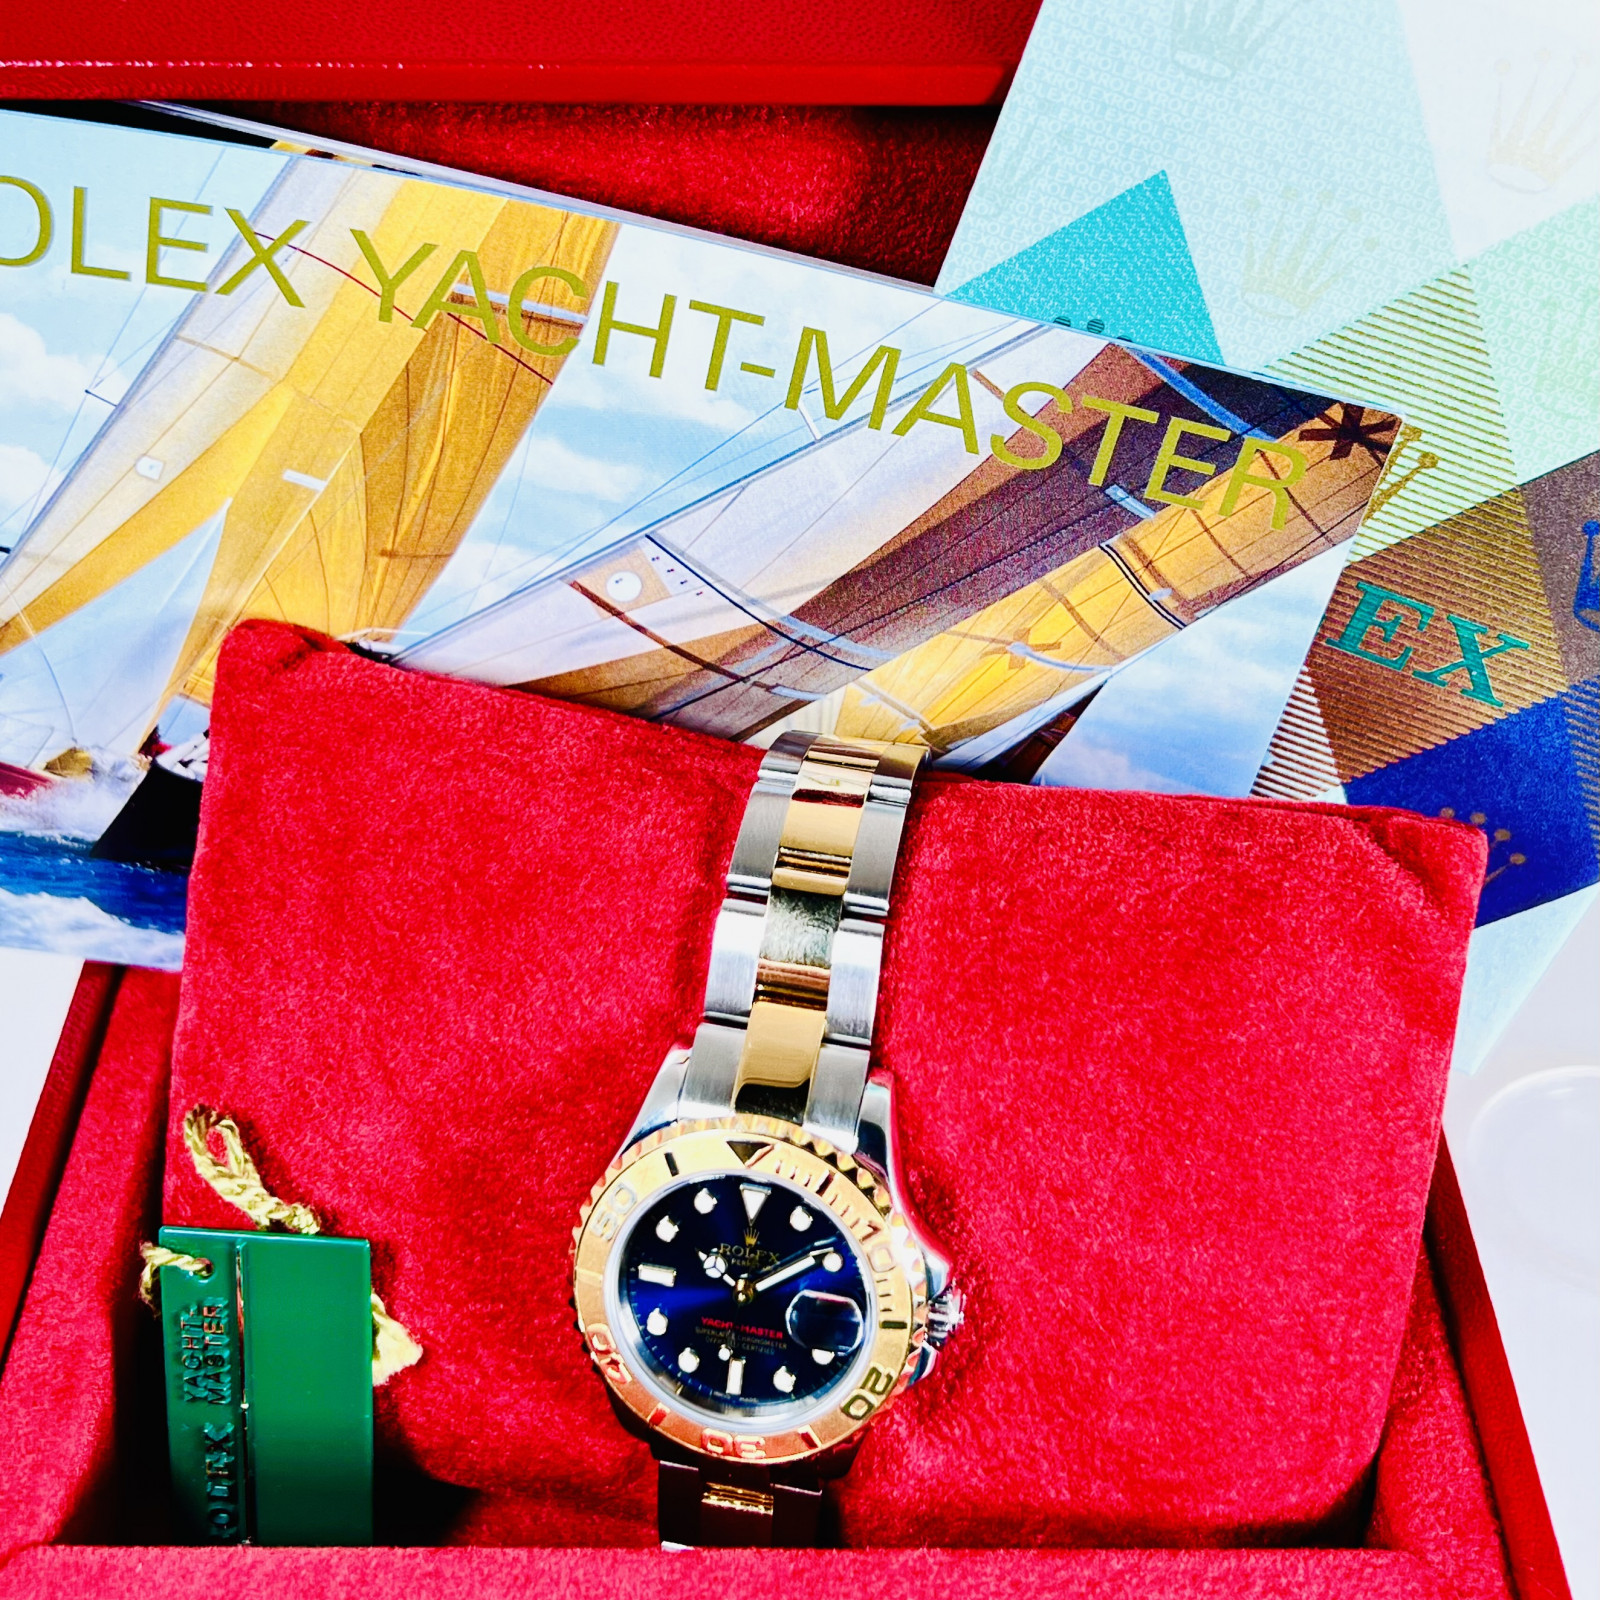 Rolex Yachtmaster Steel Yellow Gold Blue Dial Ladies Watch 169623 29 mm